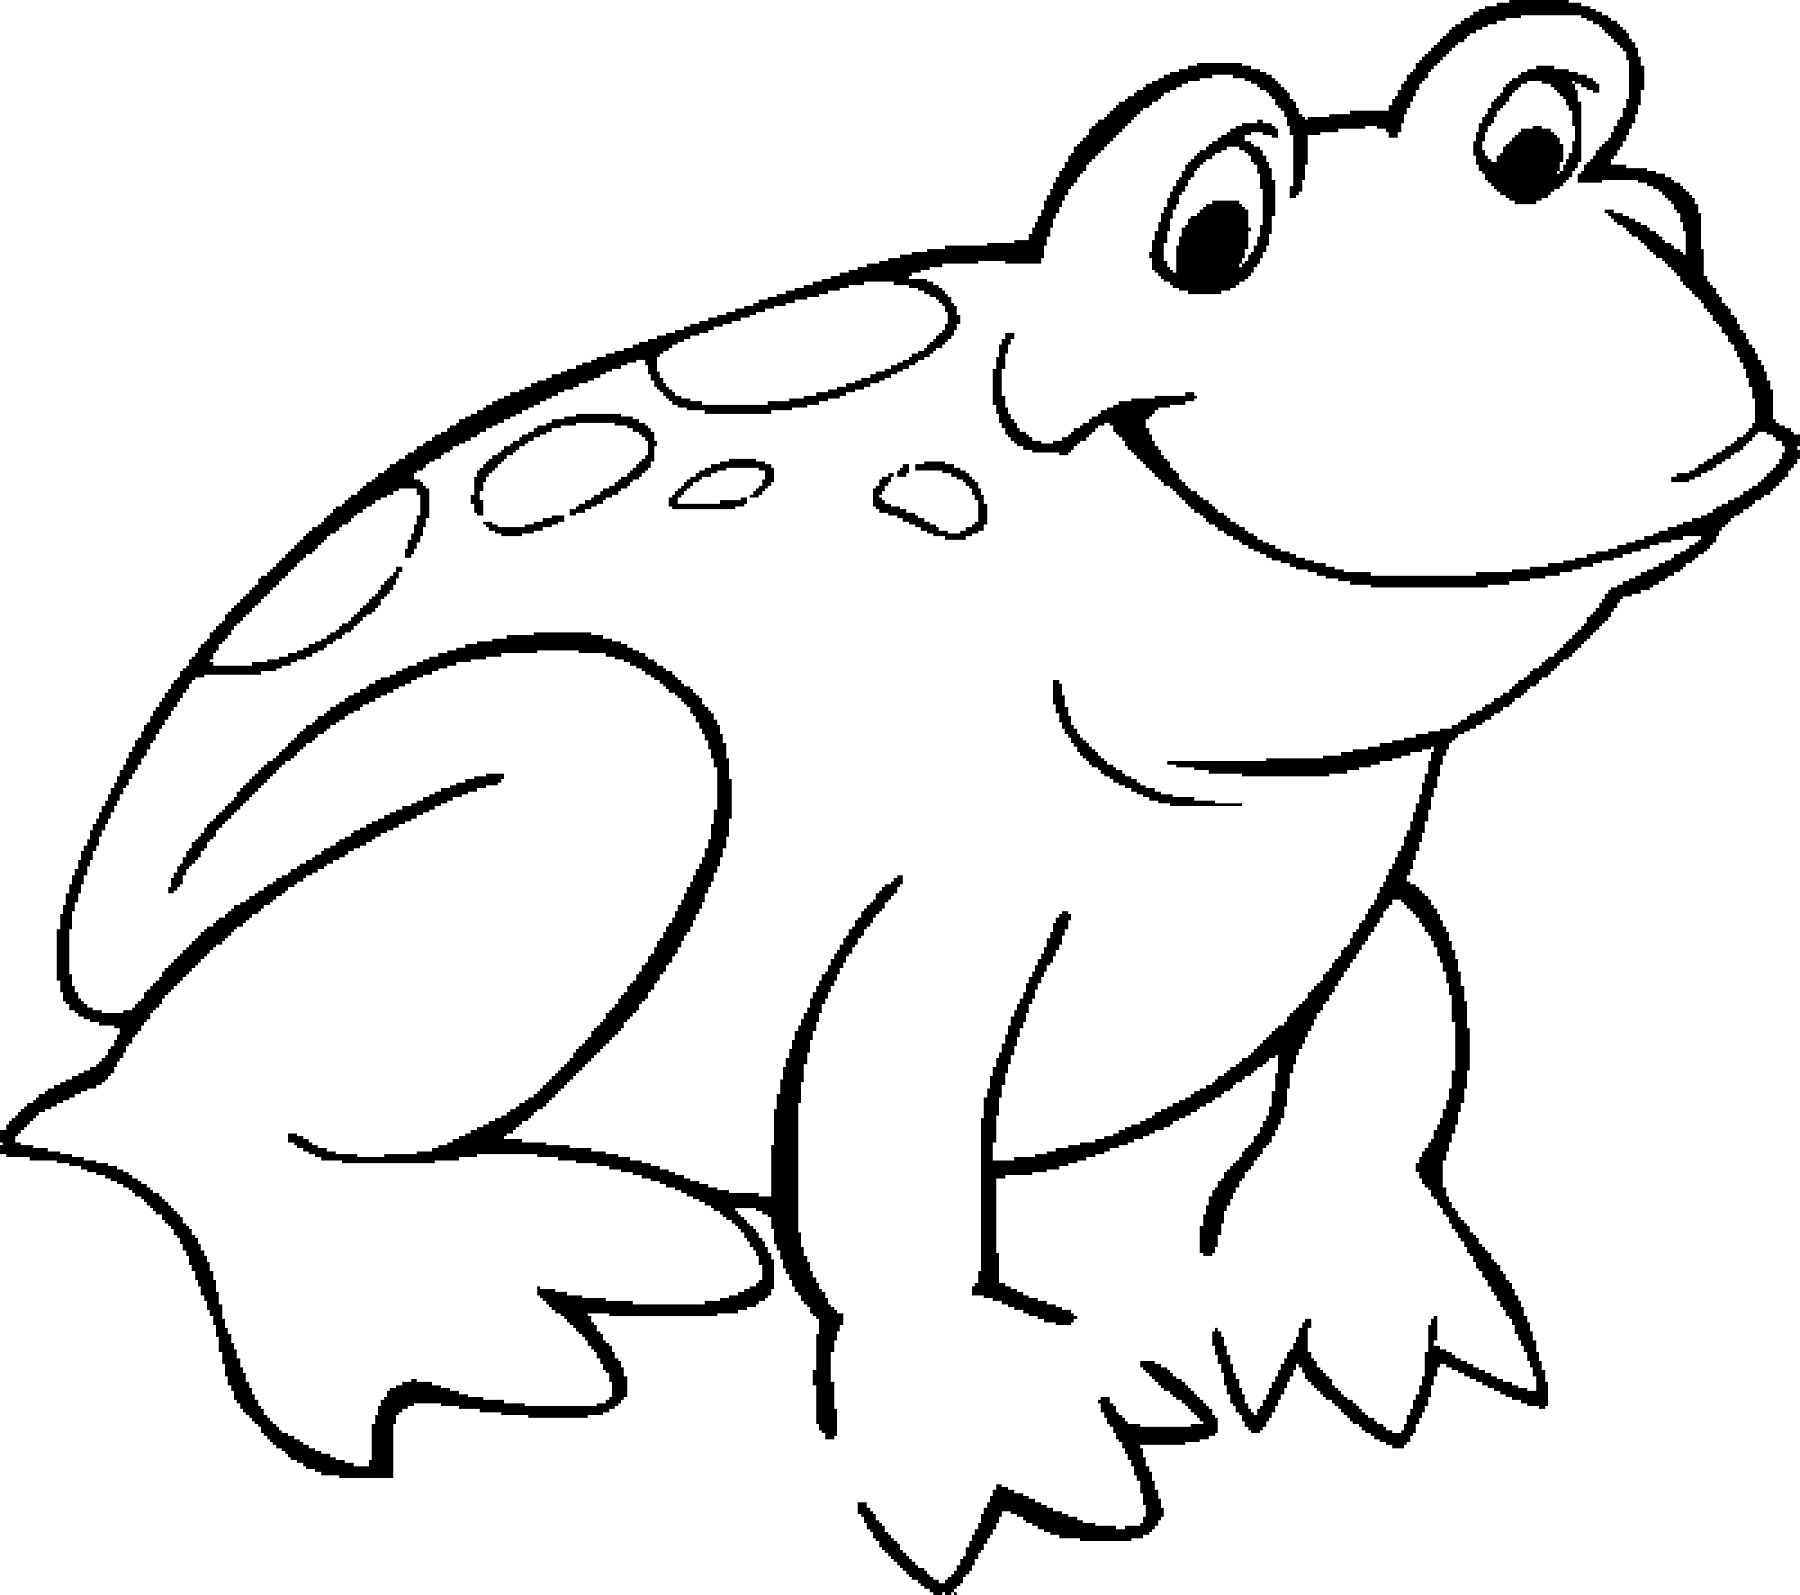 PNG Frog Black And White - 137742